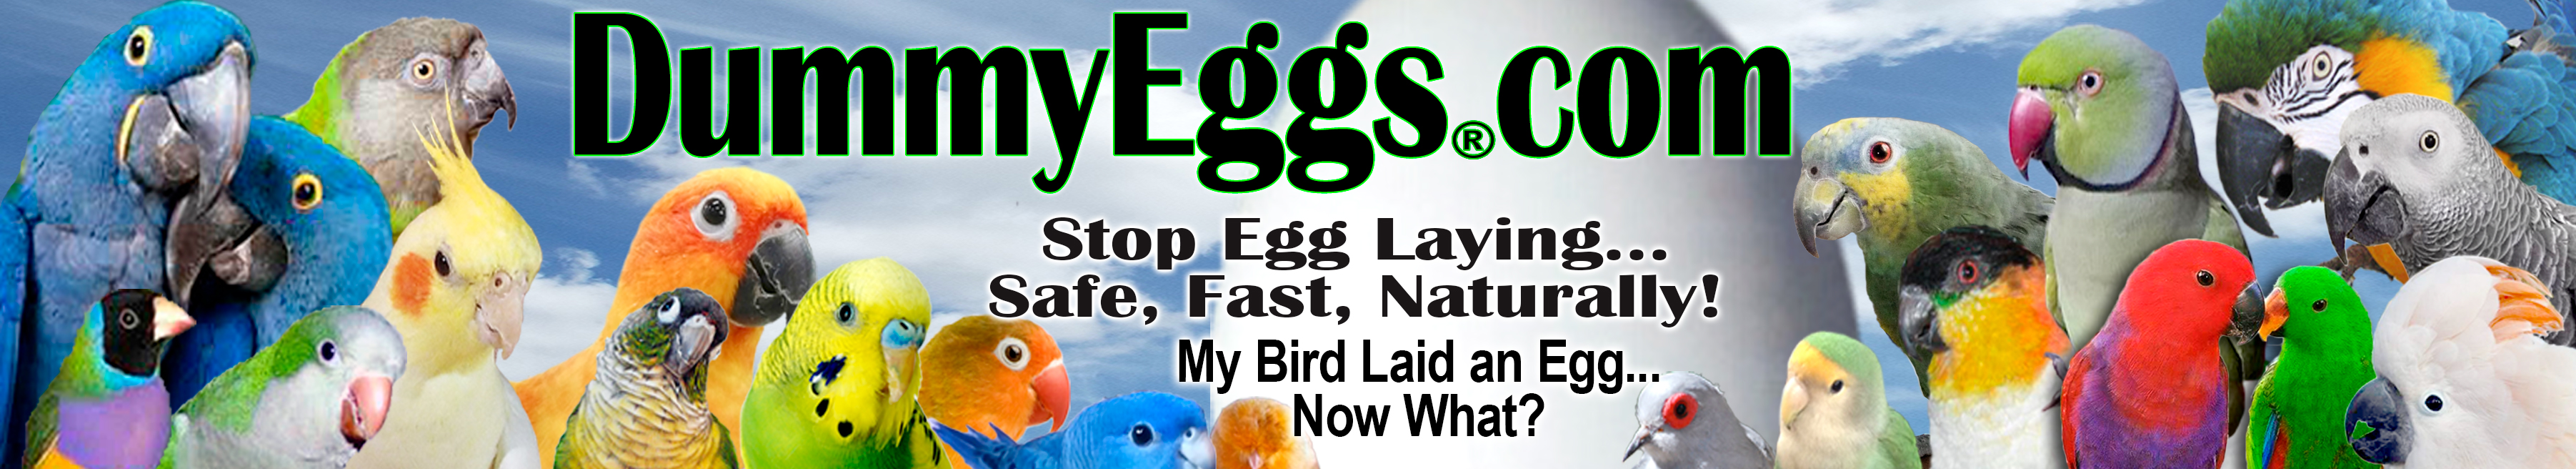 DummyEggs.com sells Dummy Eggs to stop egg laying in pet birds of all sizes. Solid Plastic Non-Toxic Fake Bird Eggs, control laying fast, safe, and naturally.